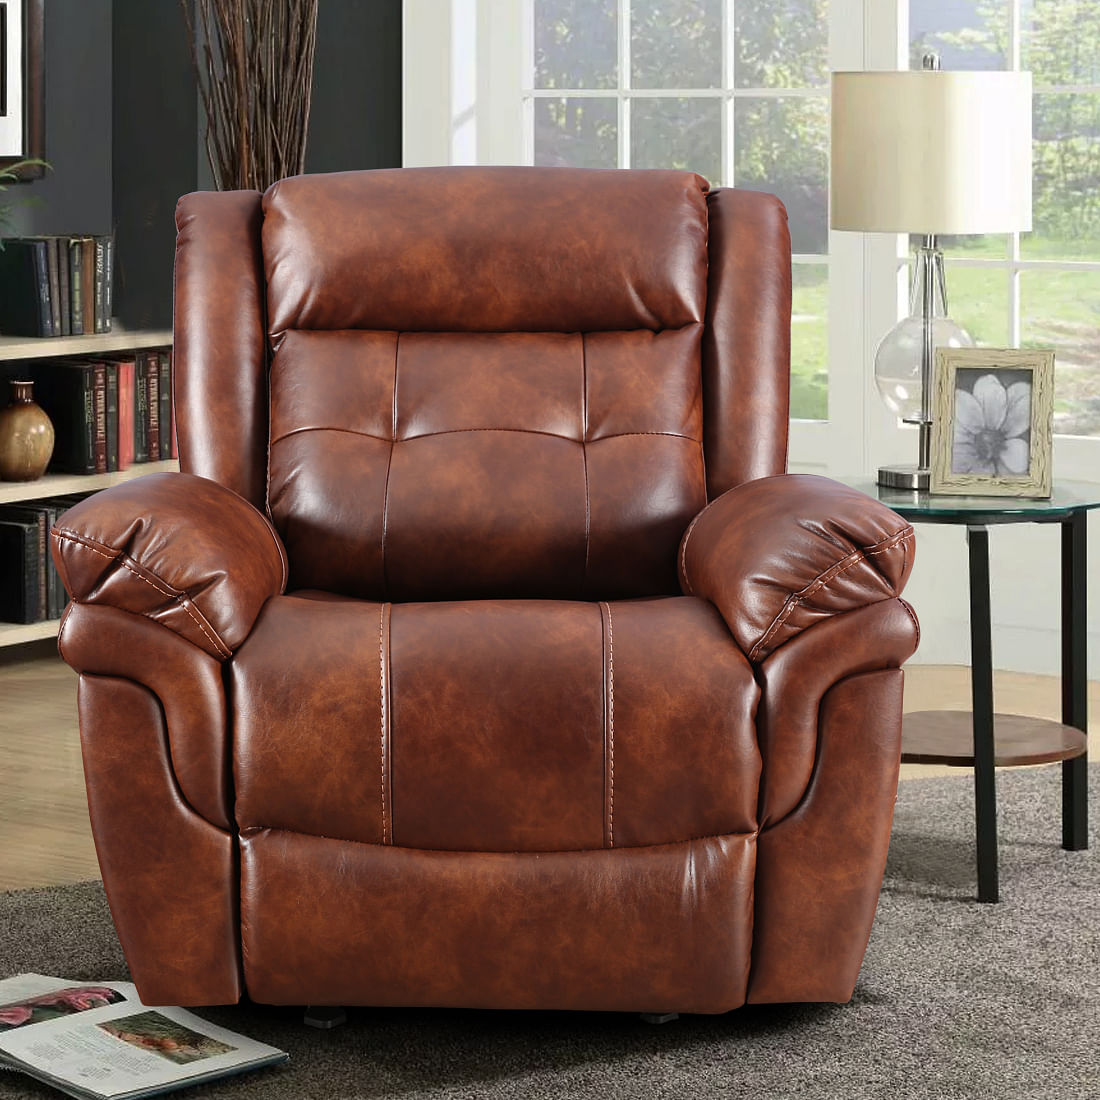 Eclairs Leather Fabric Recliner in Tan Colour